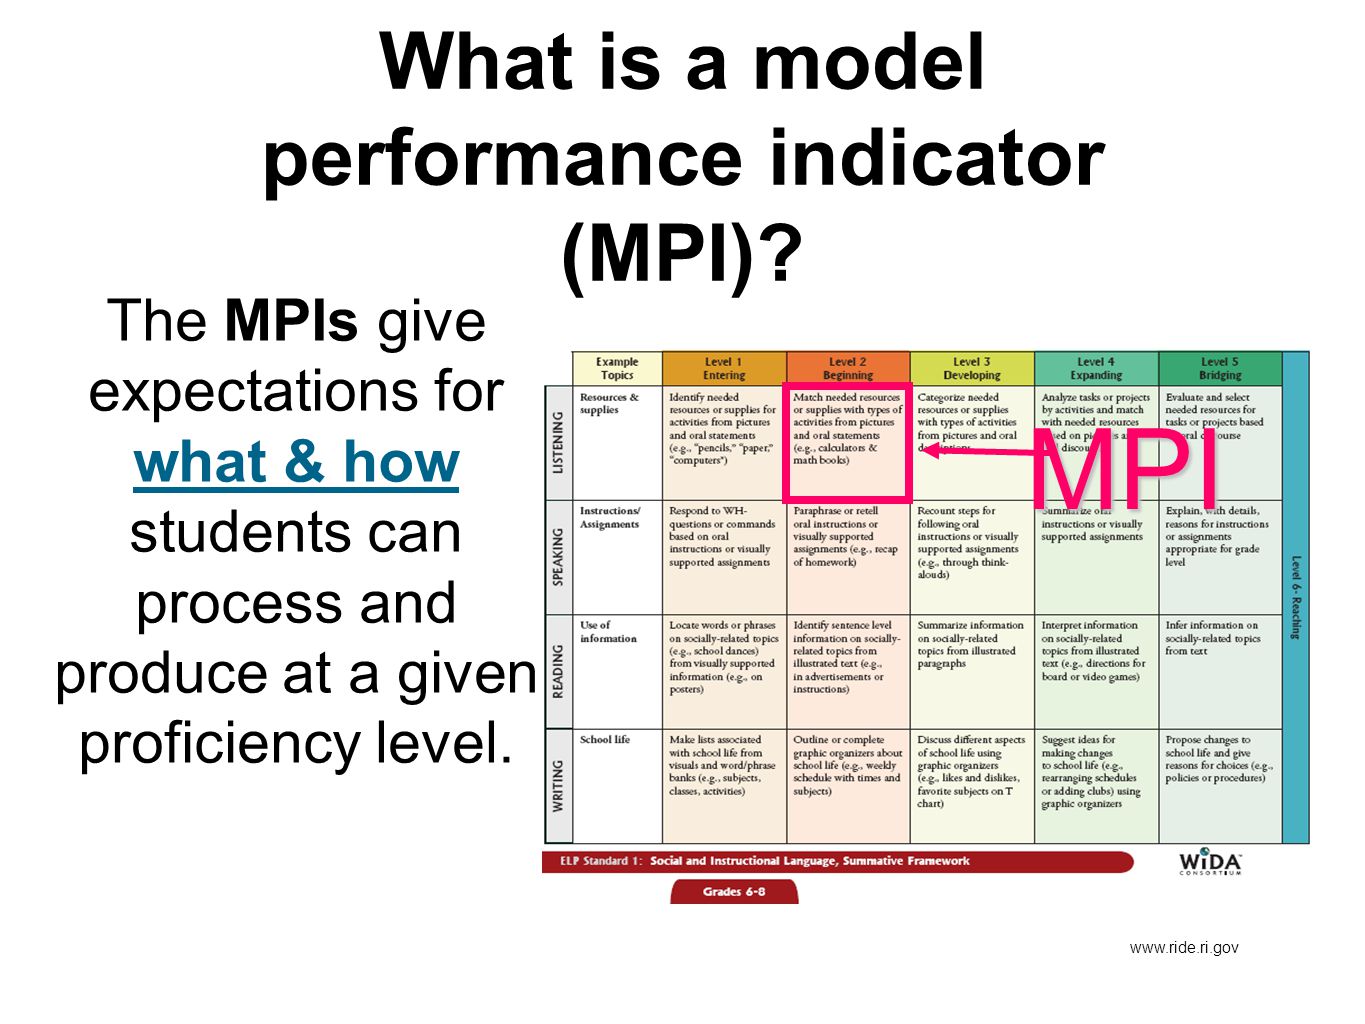 What is a model performance indicator (MPI)